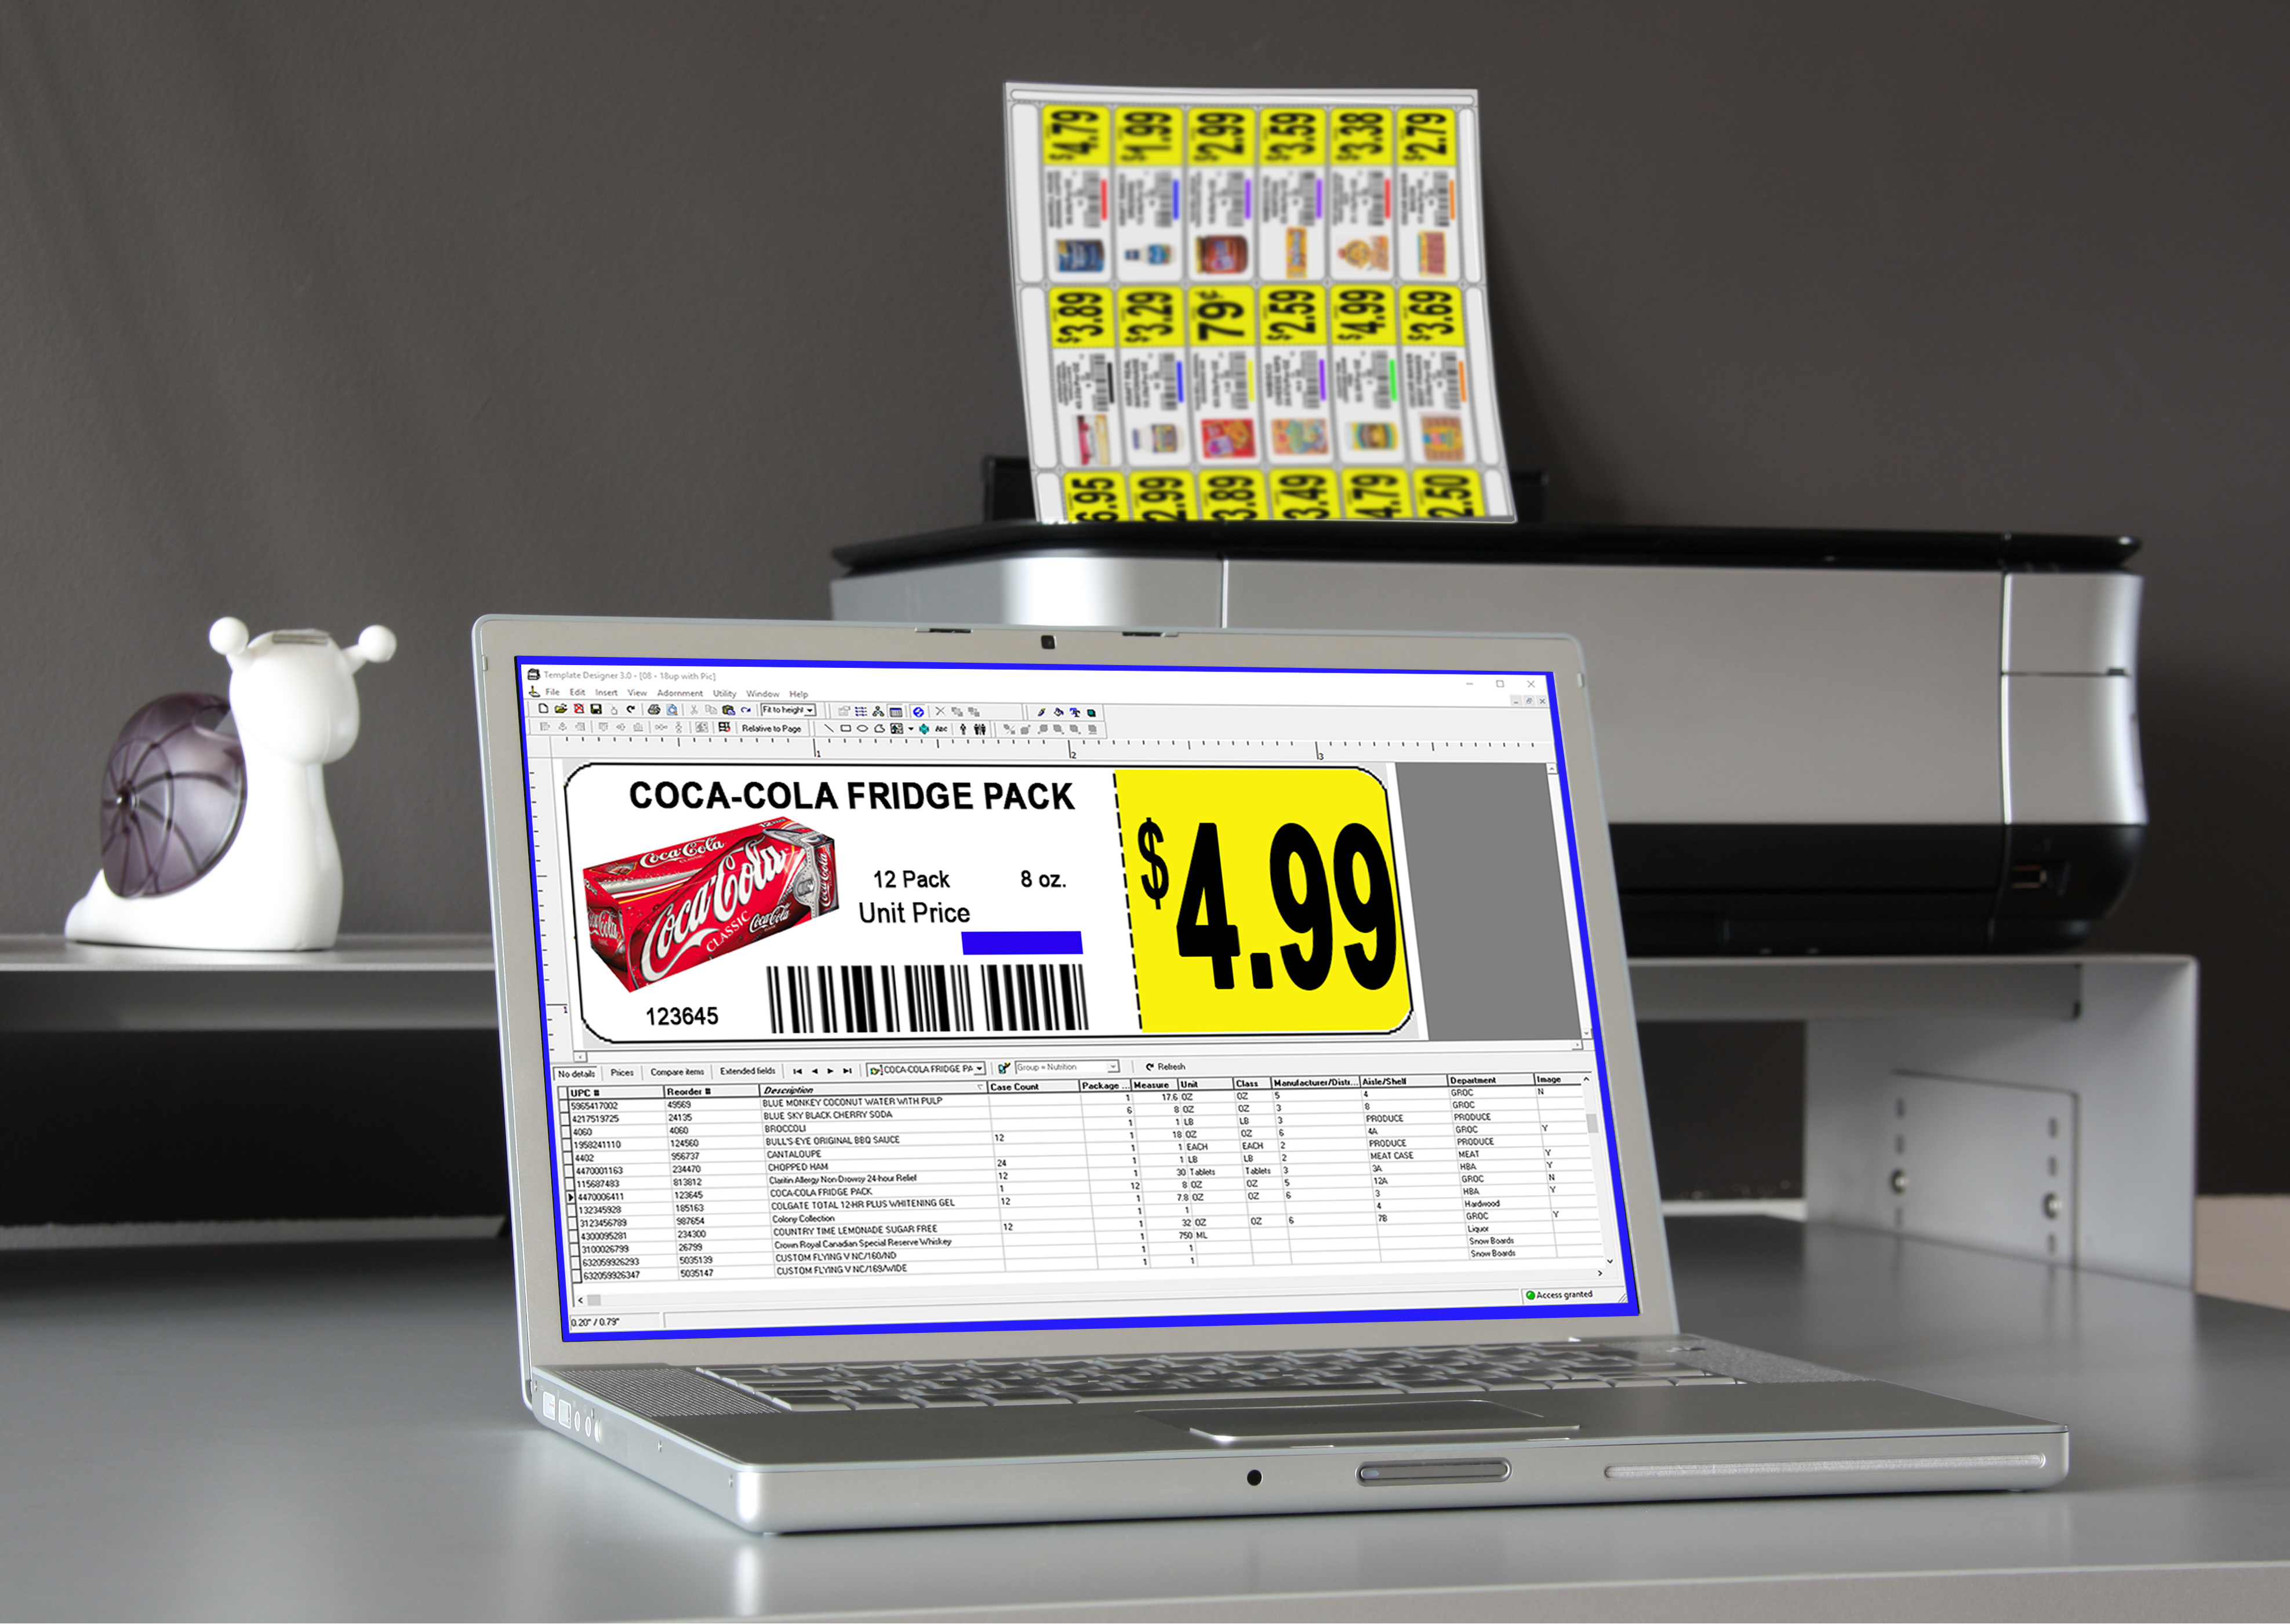 Retail Price Tags, Product Labels